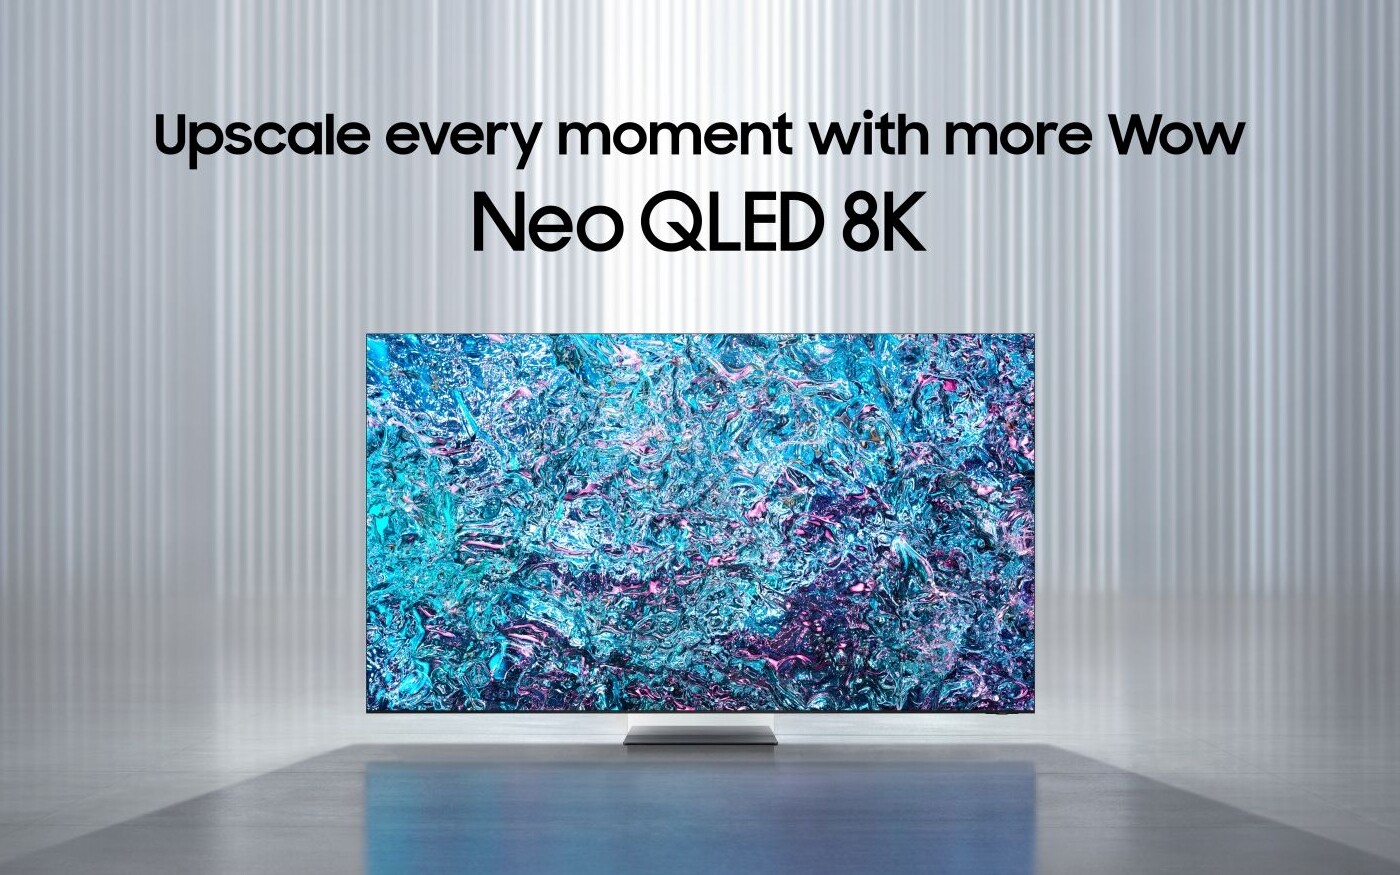 Samsung unveiled new QLED, Micro LED and OLED TVs.  The company is focusing on AI and 8K